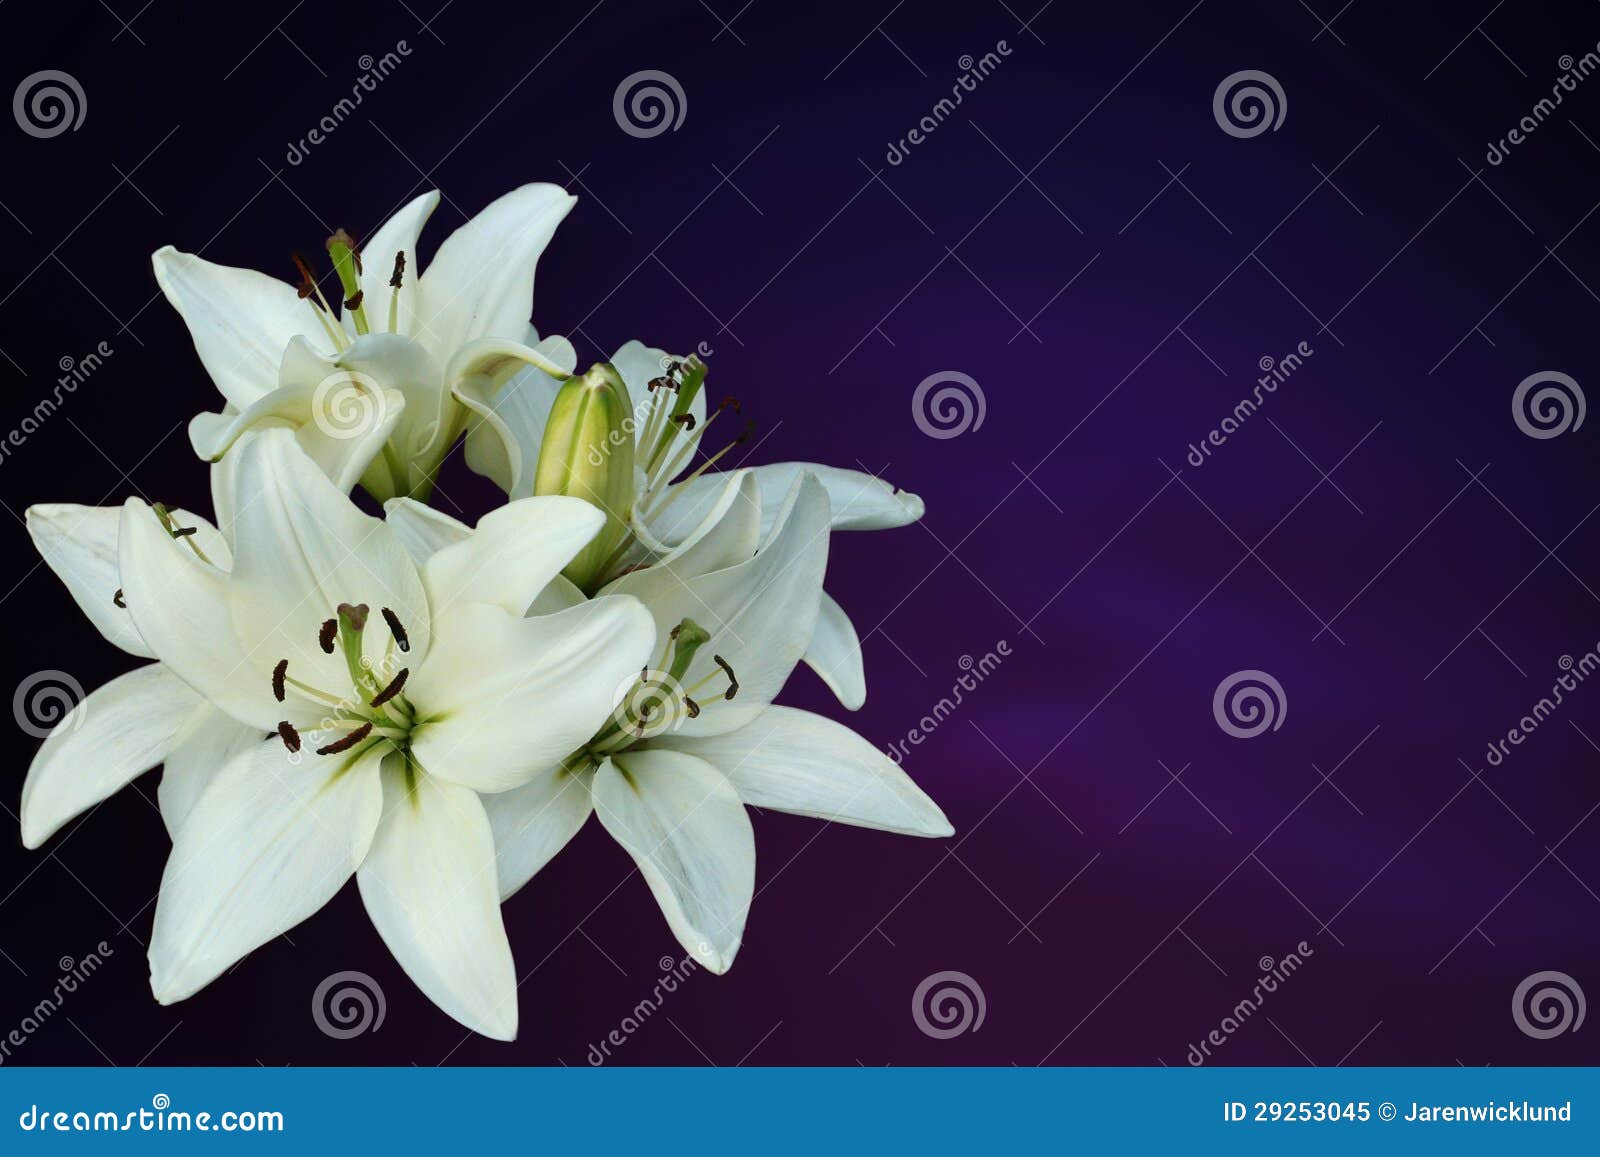 white lilies on purple background